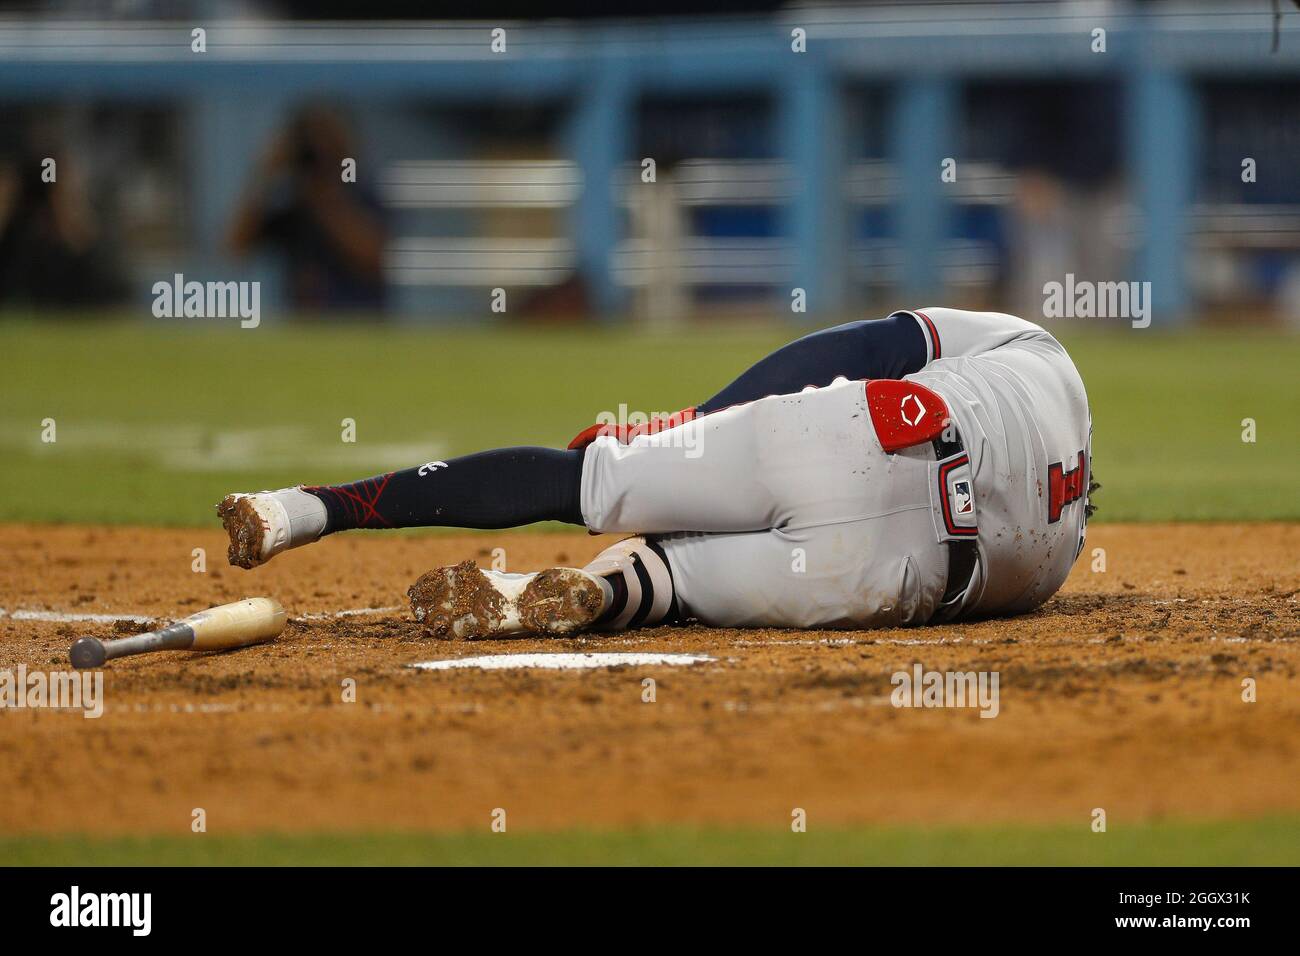 Atlanta Braves second basemen Ozzie Albies (1) gets injured while batting during an MLB regular season game against the Los Angeles Dodgers, Tuesday, Stock Photo